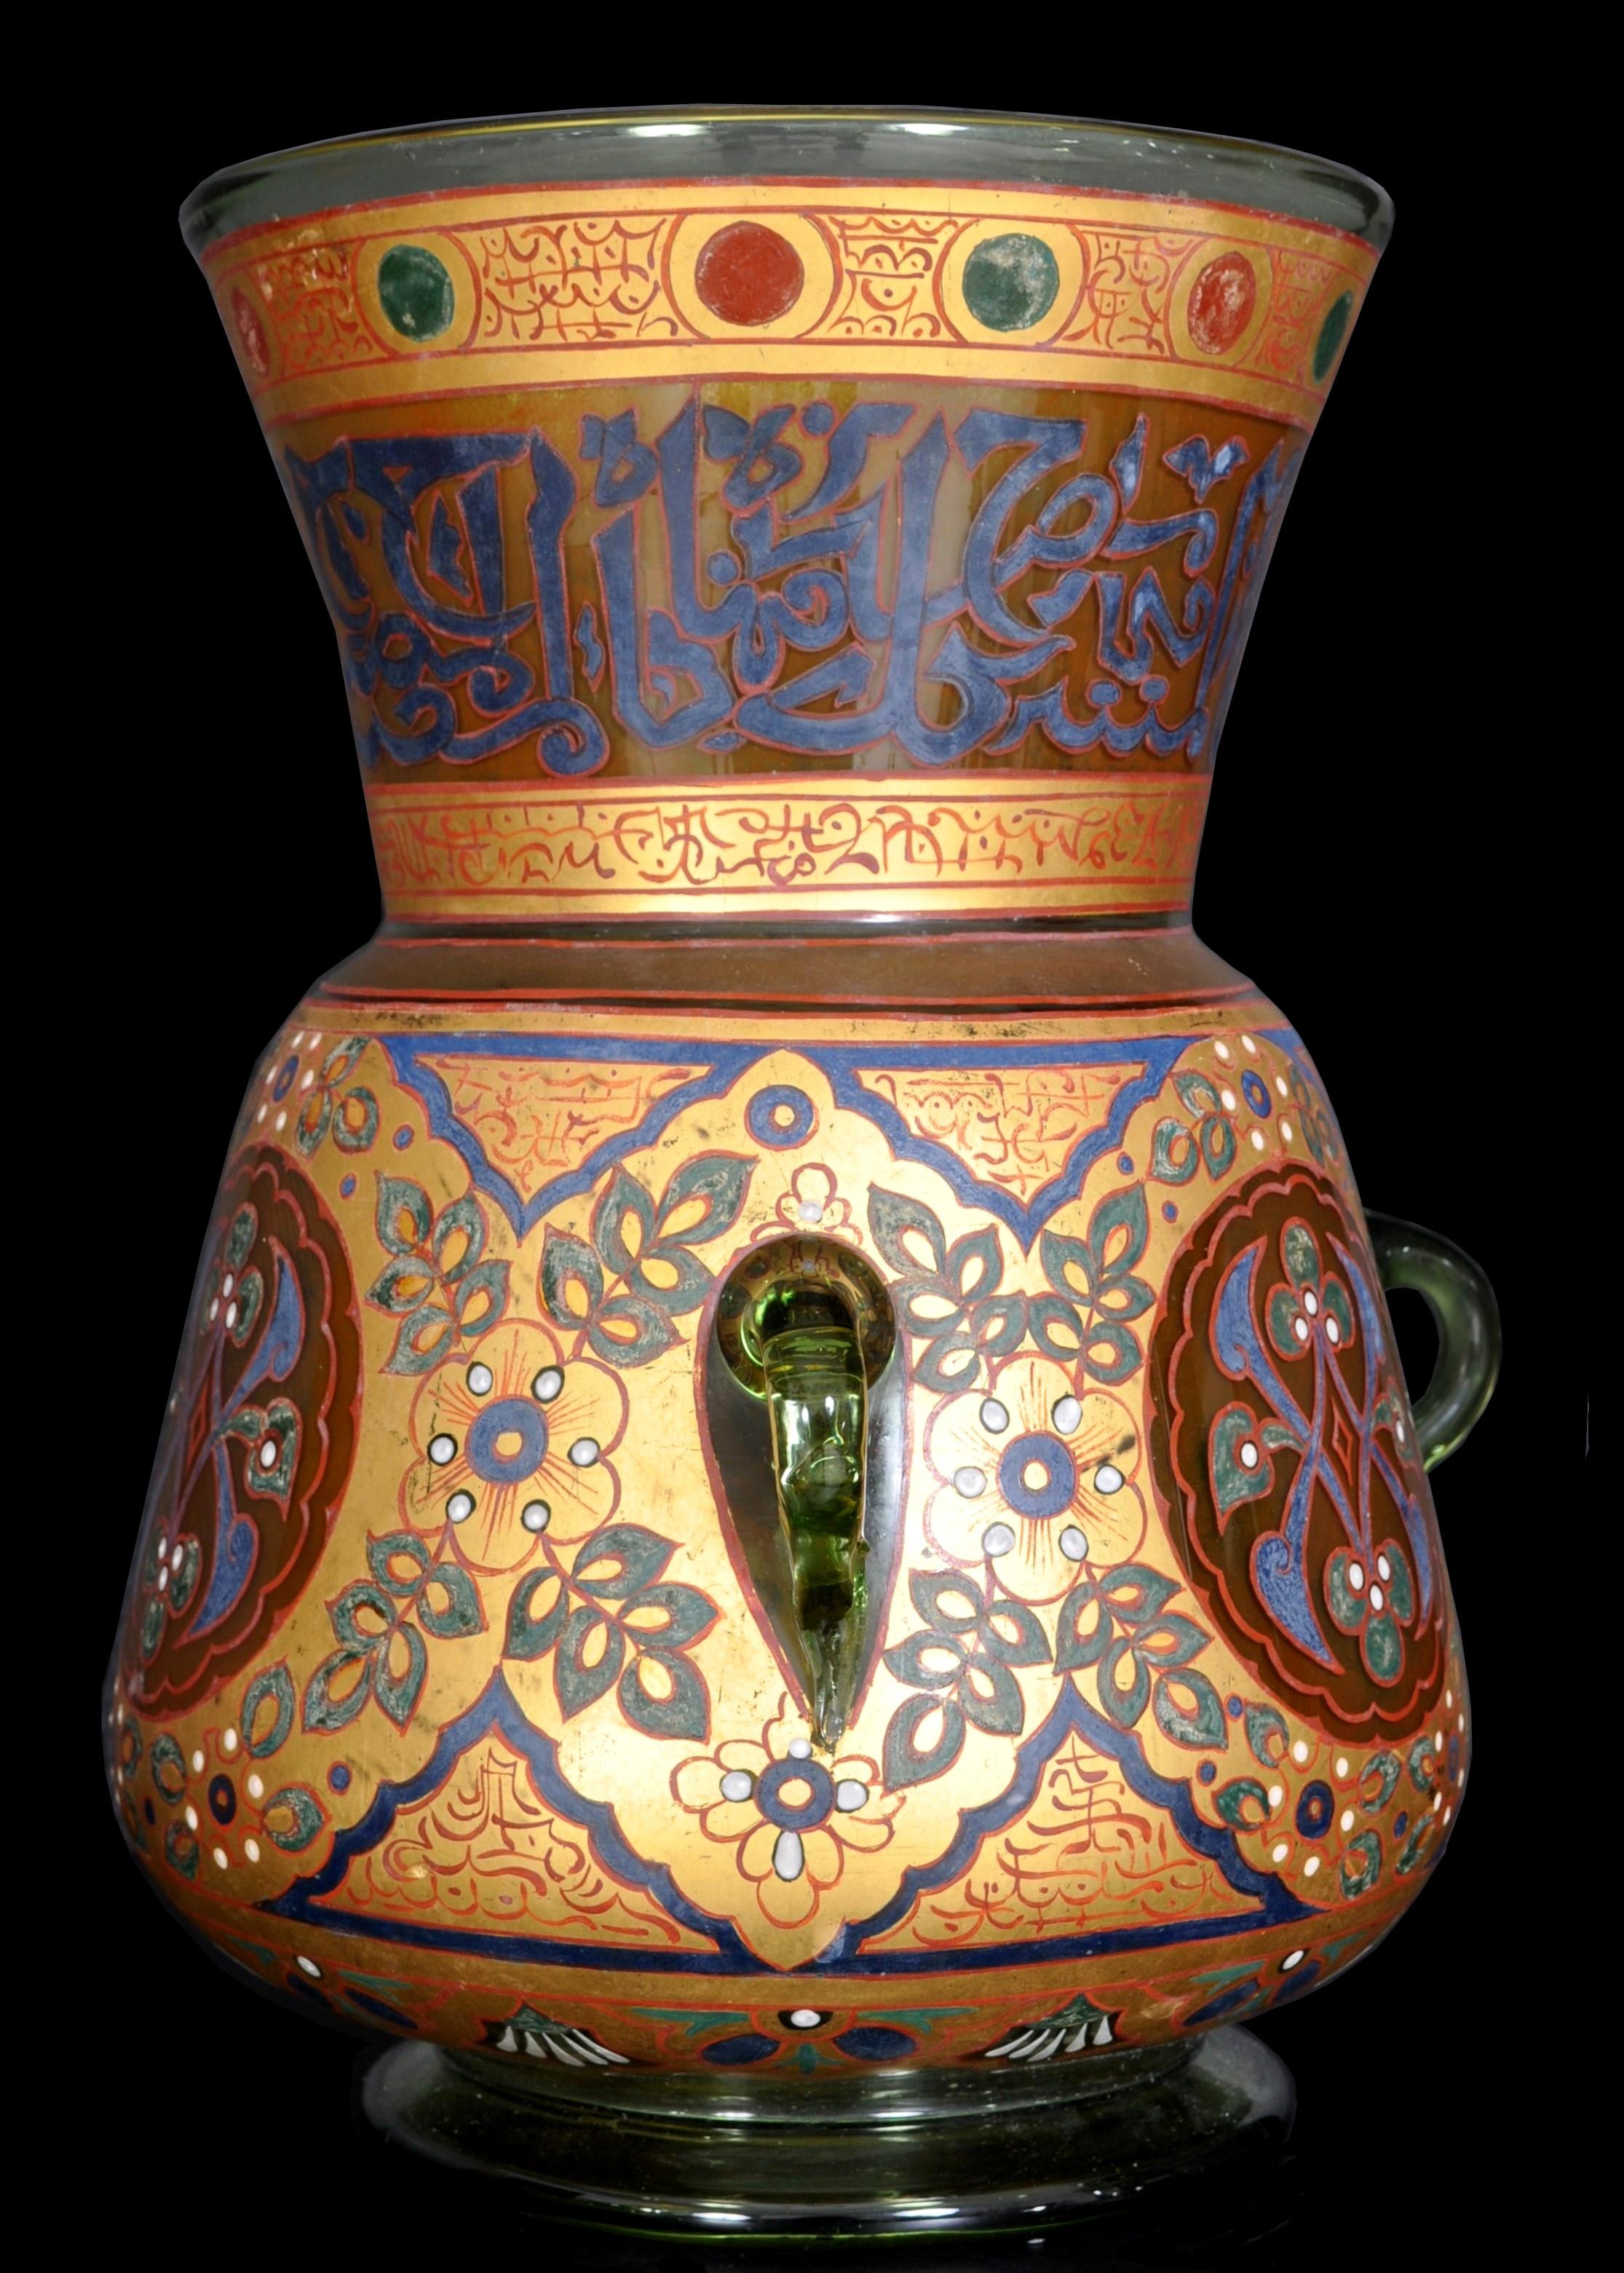 Late 19th Century Antique French Islamic Glass Enamel Gilt Mamluk Revival Mosque Lamp Brocard 1880